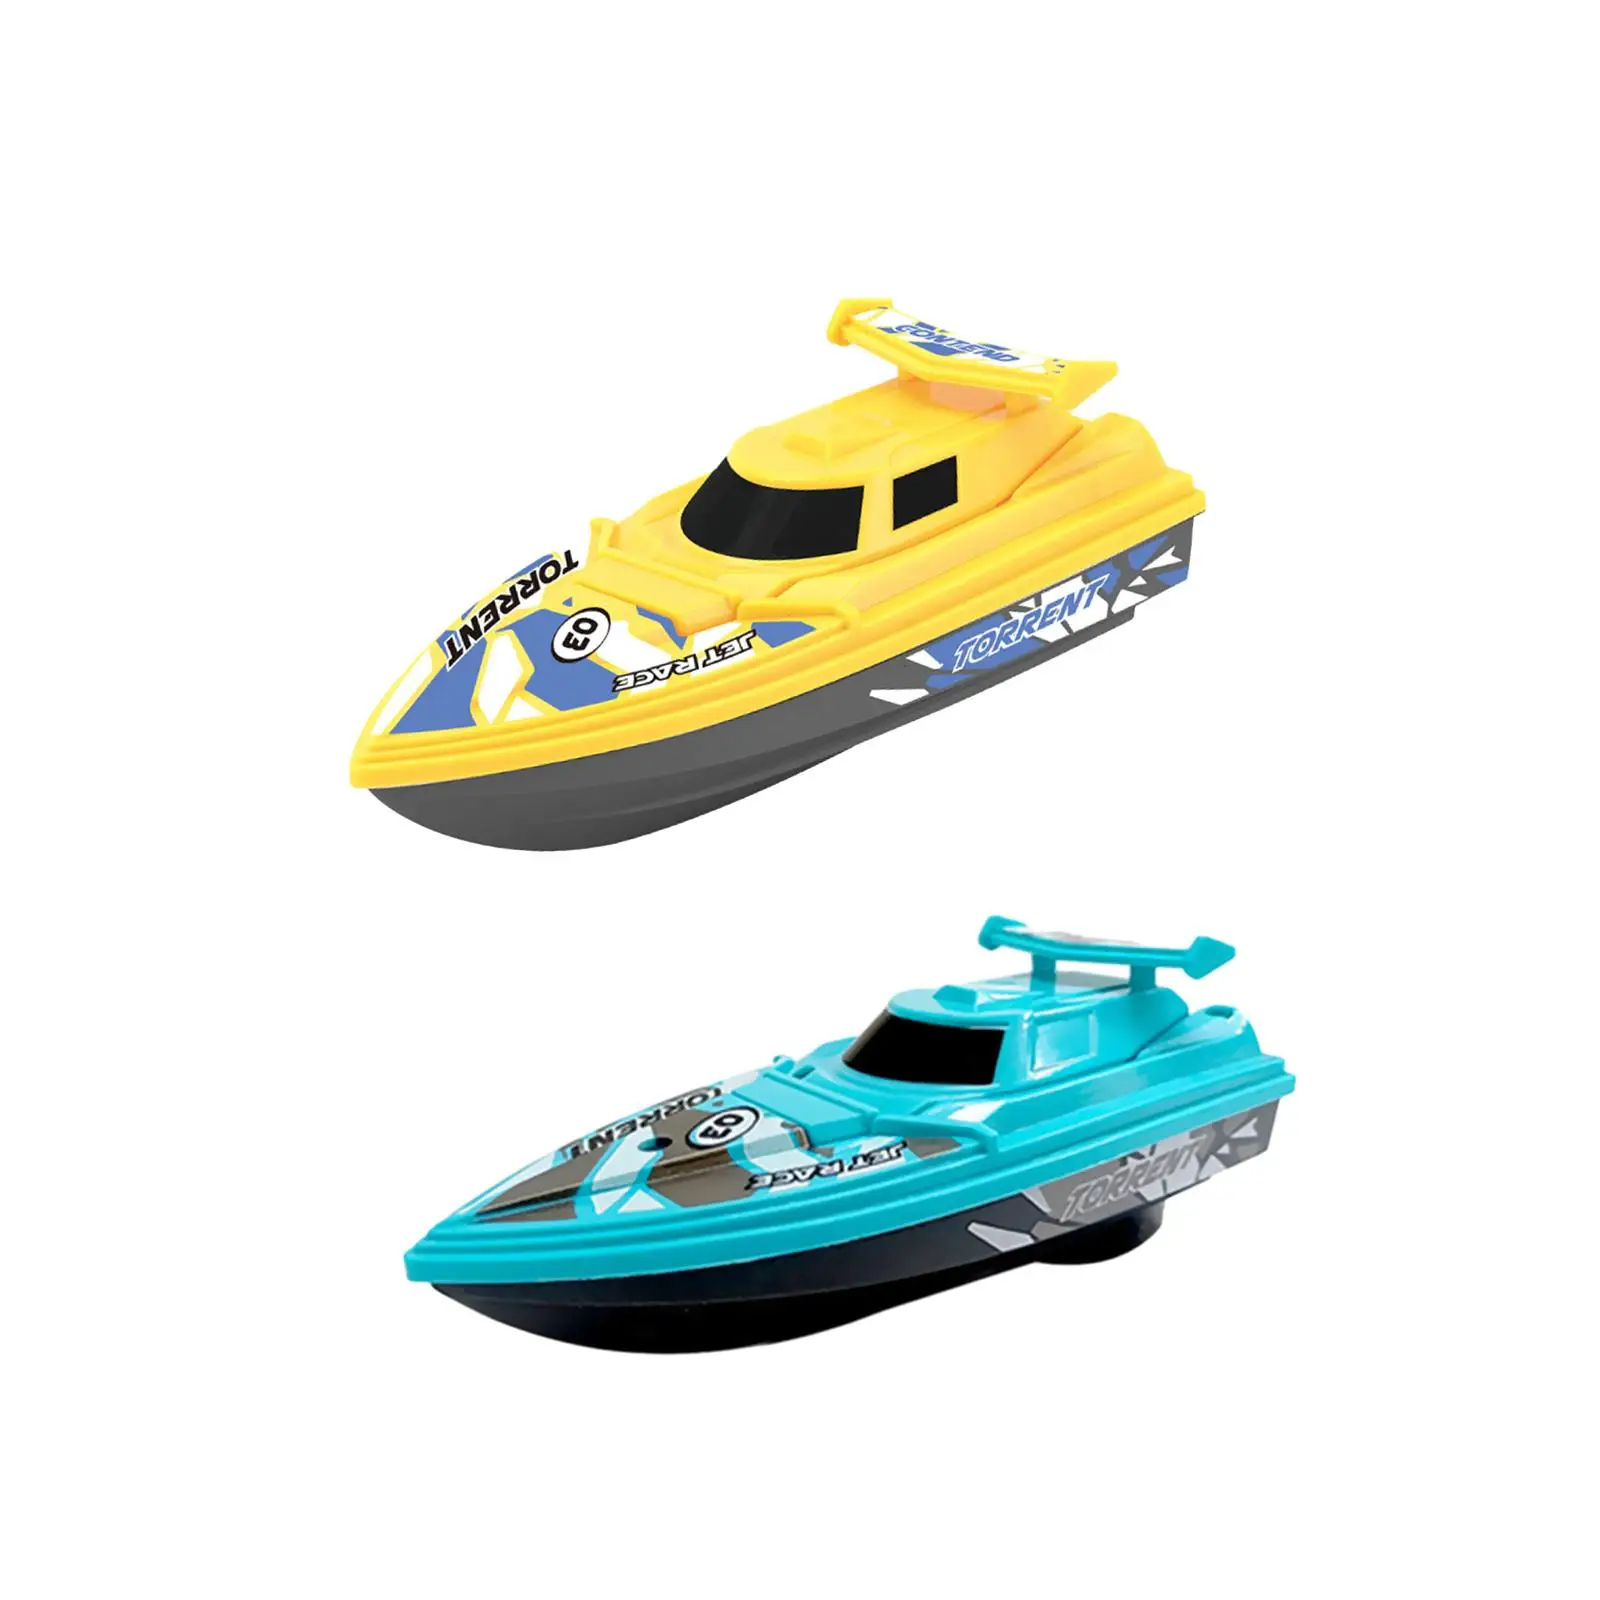 Sailing Boat Bathtub Toy Water Toy Beach Toys Christmas Gifts Birthday Gift Floating Toy Boats for Ages 1-3 Kids Toddlers Child